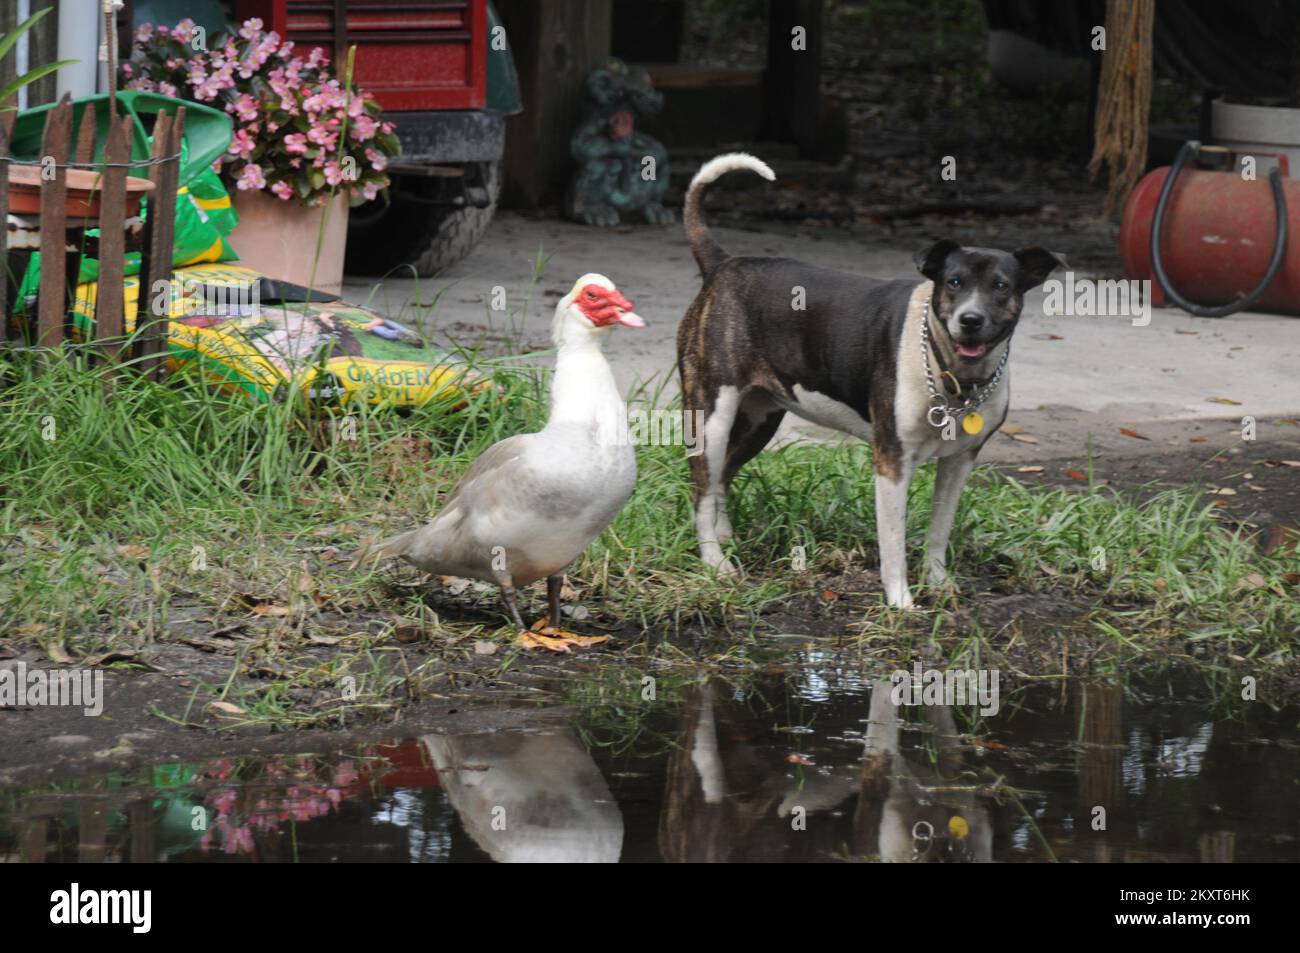 Pets Survive the Flood.. Photographs Relating to Disasters and Emergency Management Programs, Activities, and Officials Stock Photo